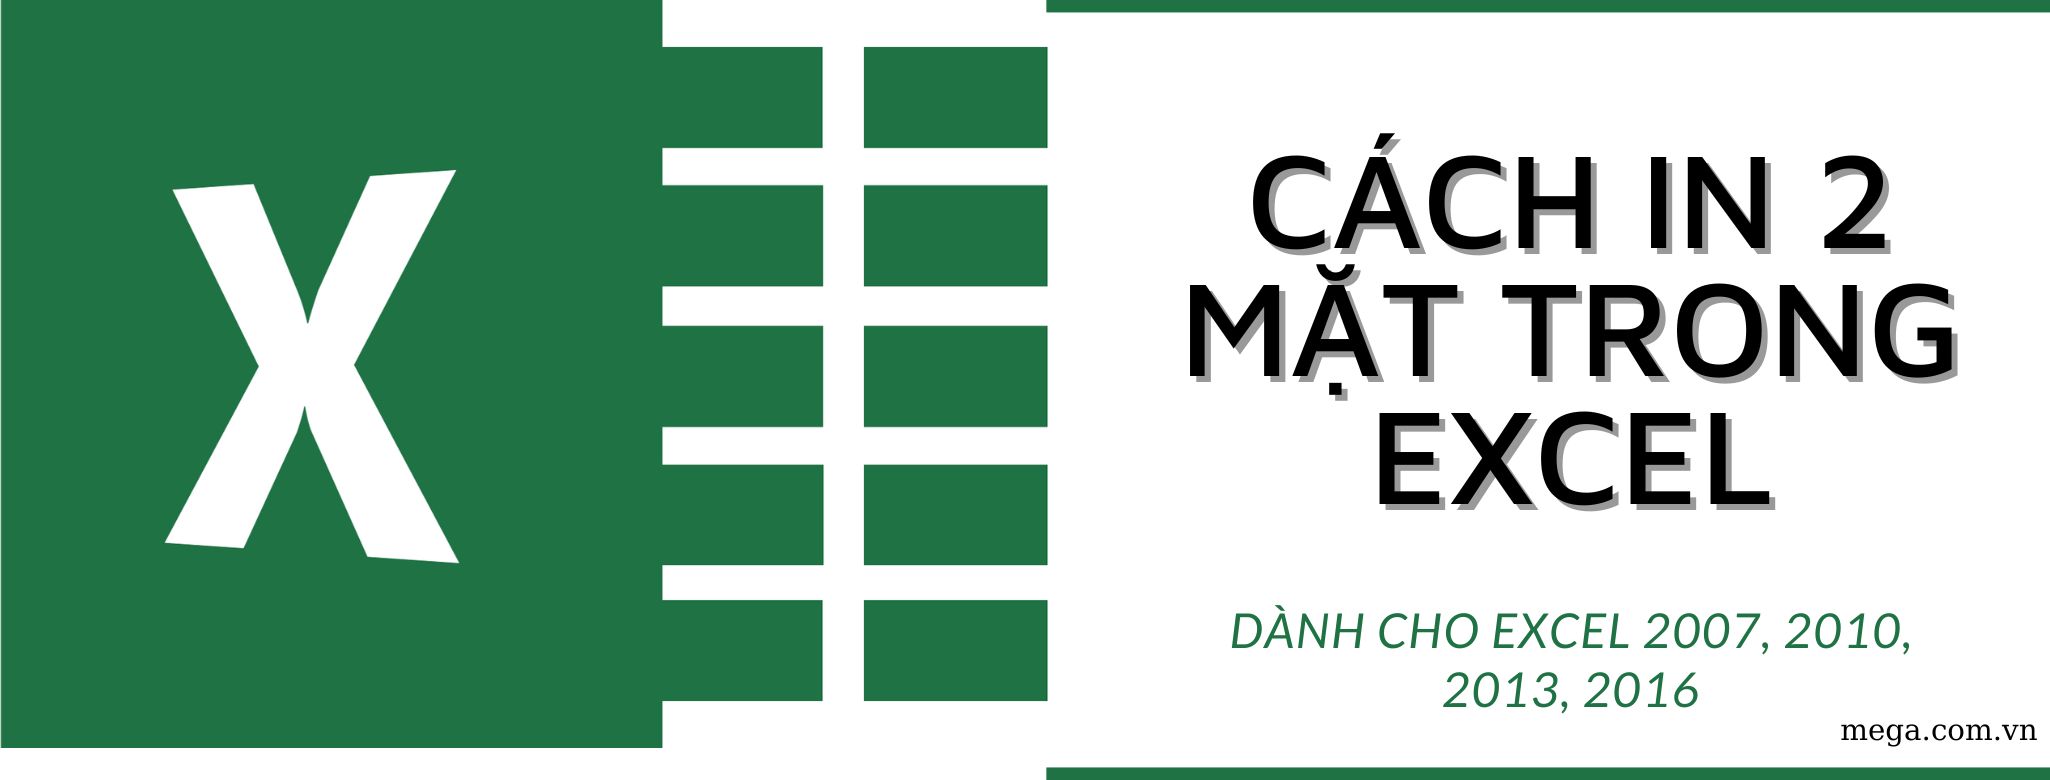 Cách in hai mặt trong Excel bằng máy in Canon?
